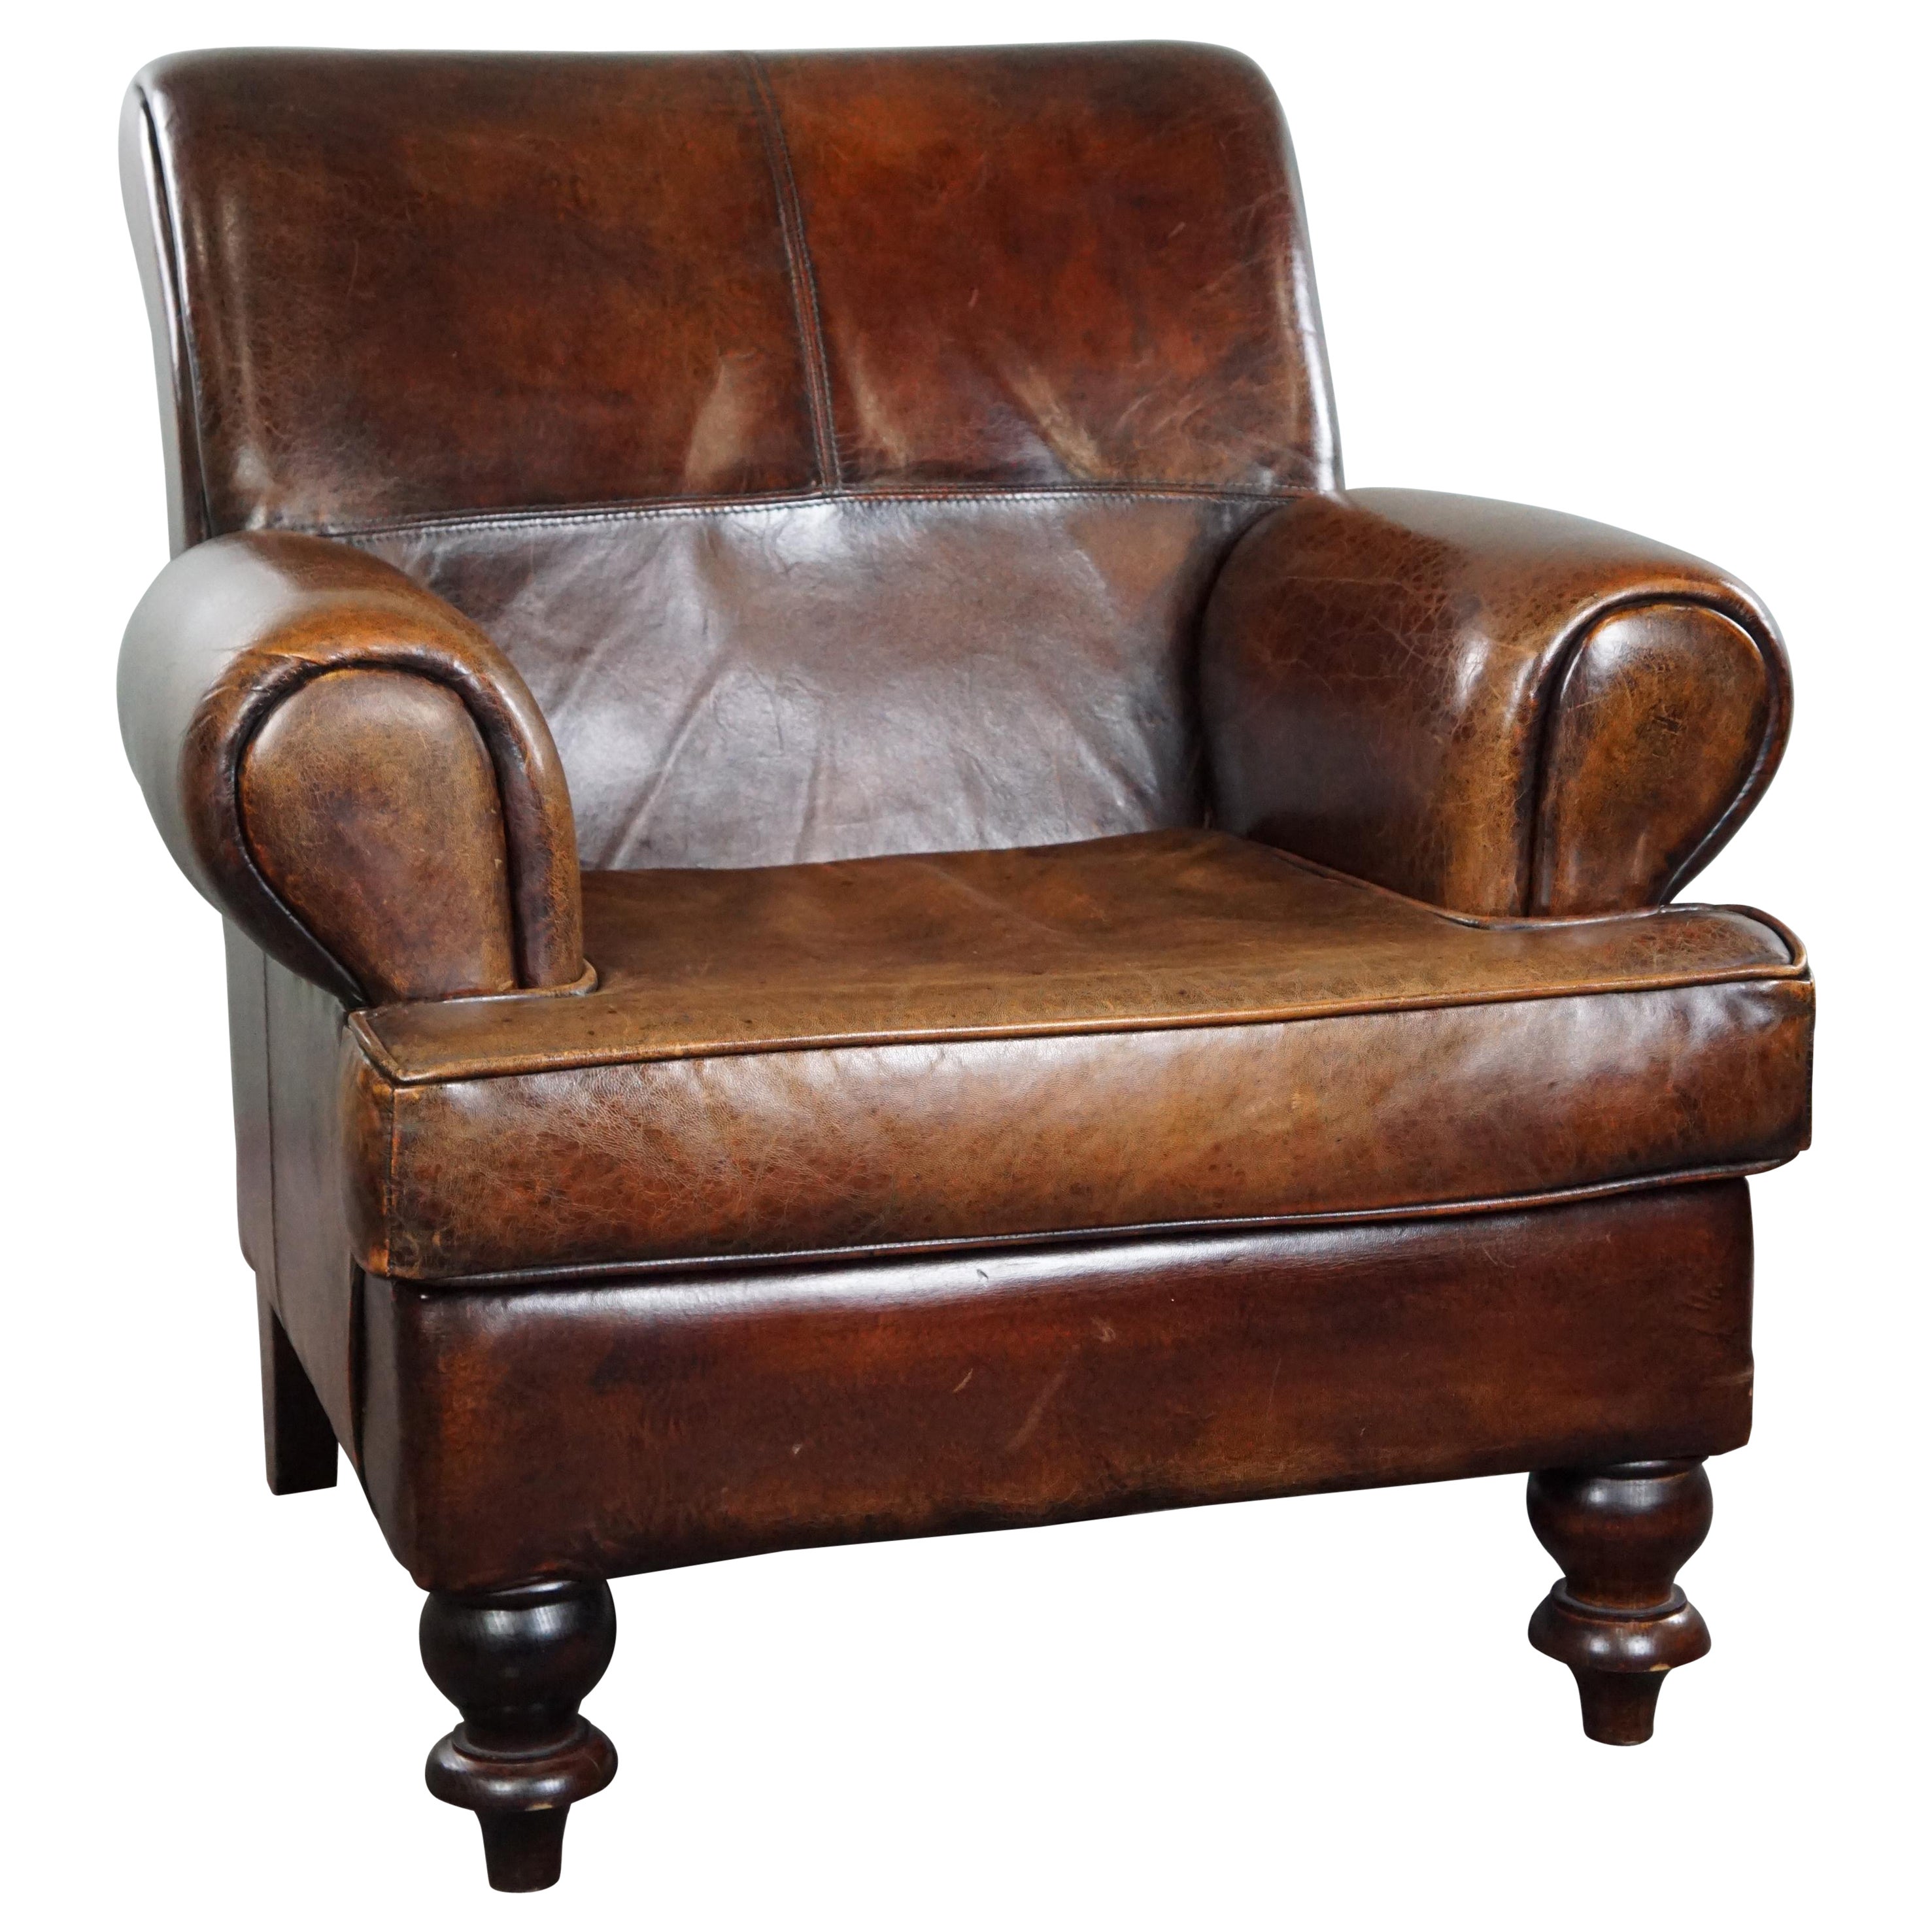 Spacious sheepskin armchair with a relaxed deep seat For Sale